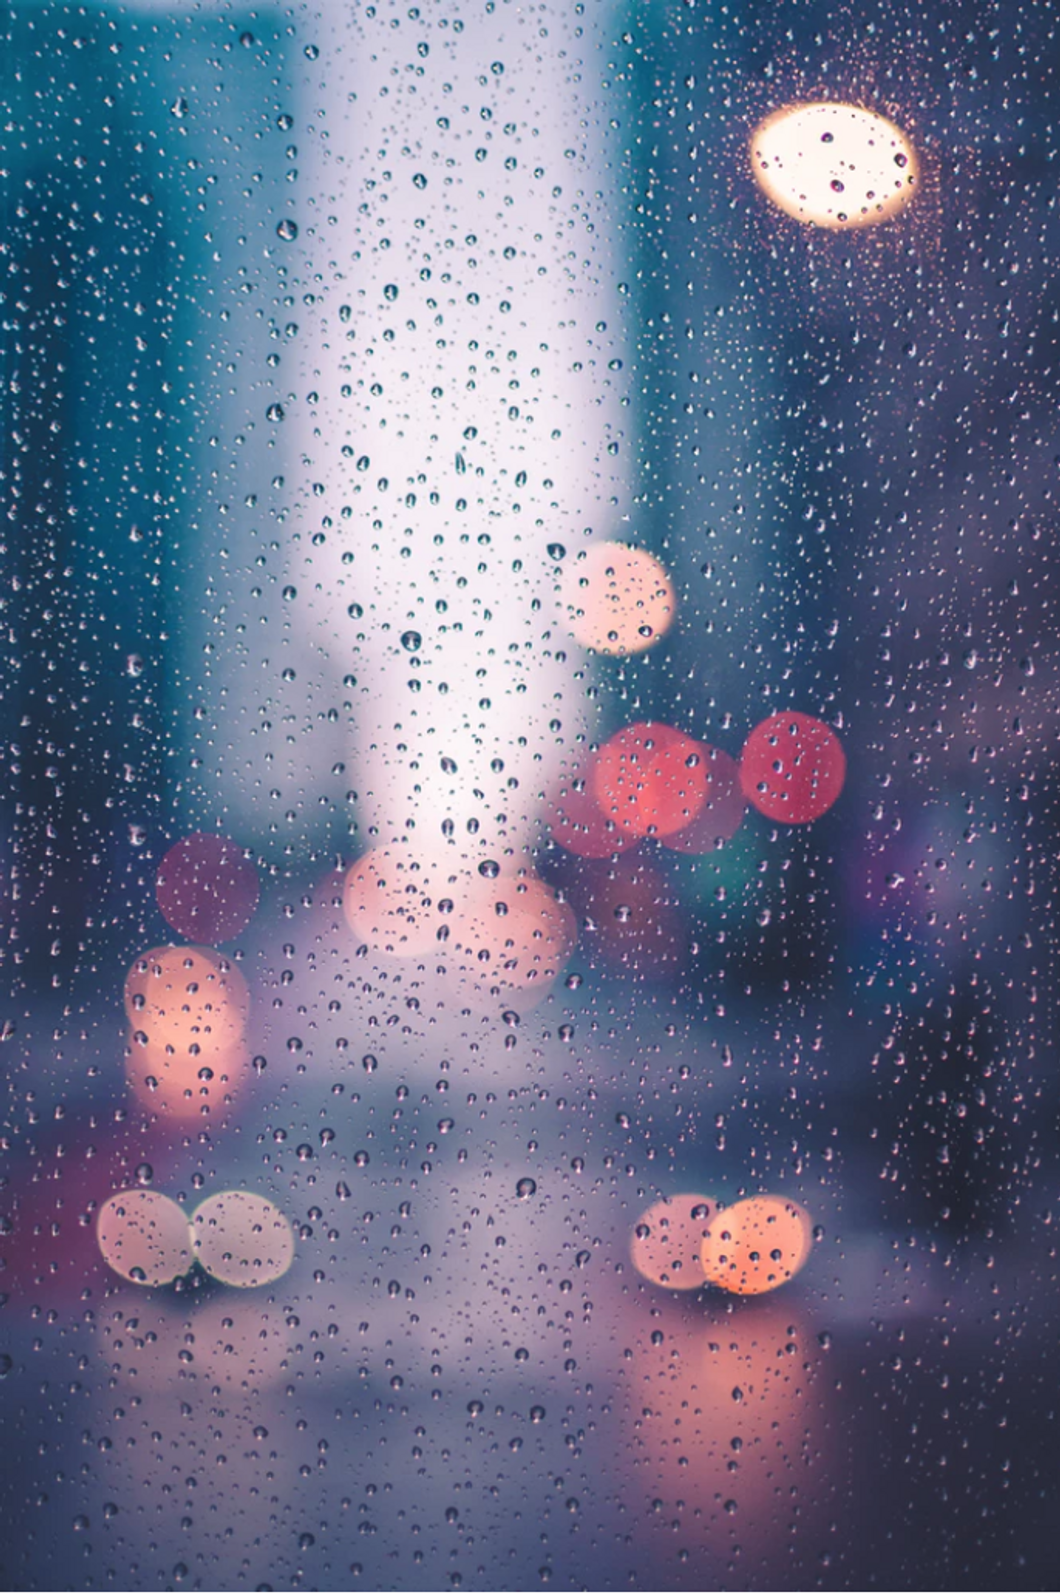 5 Ways To Stay Productive On A Rainy Day